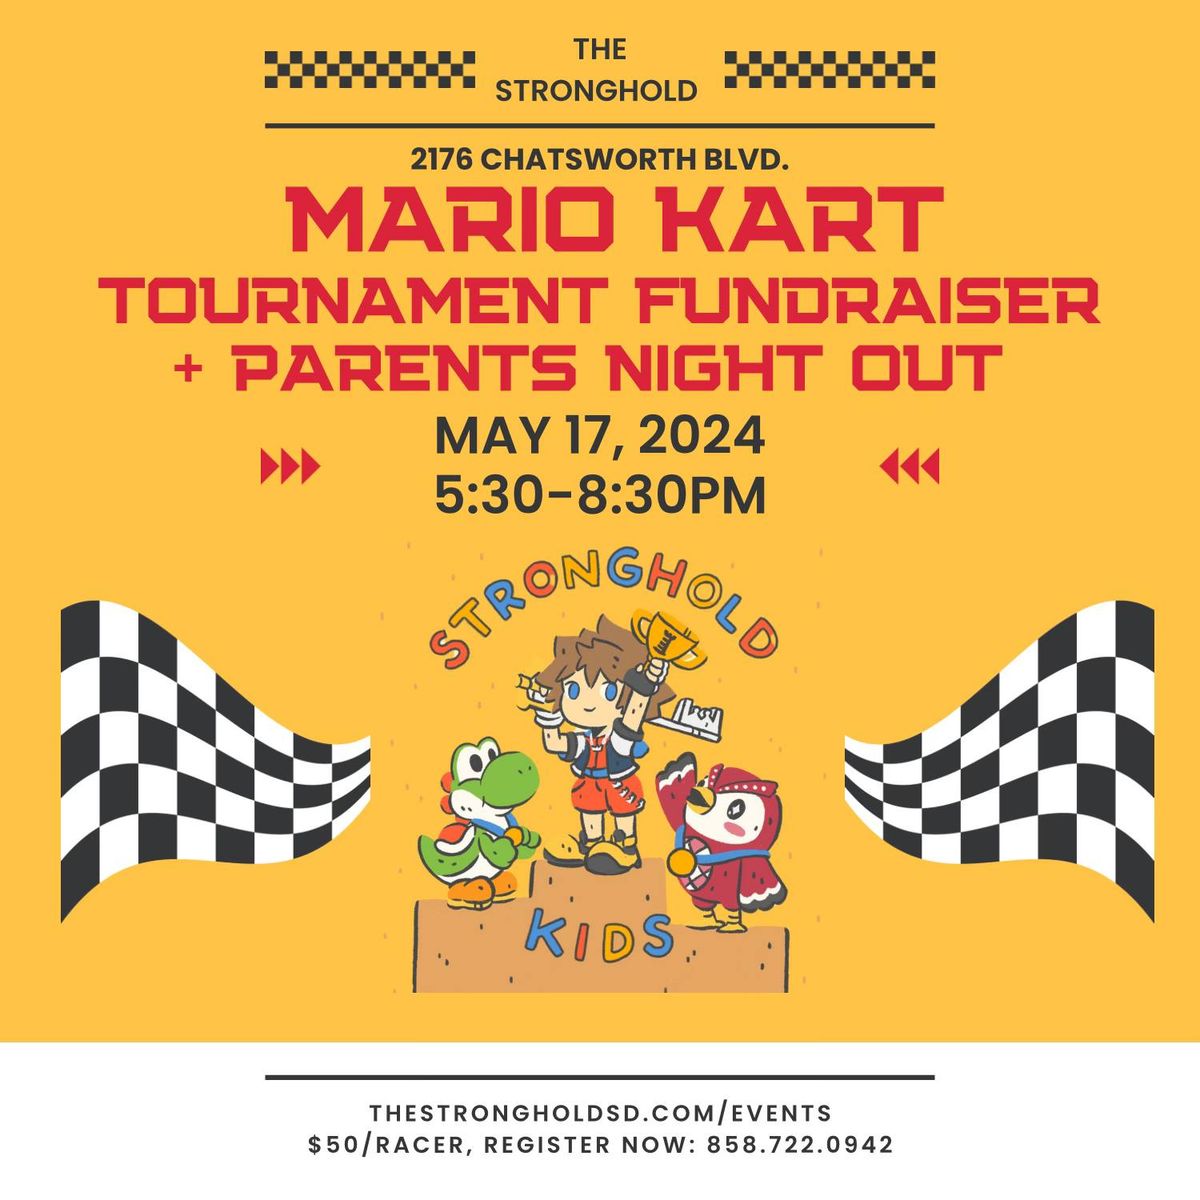 May 17 Stronghold Mario Kart Tournament Fundraiser